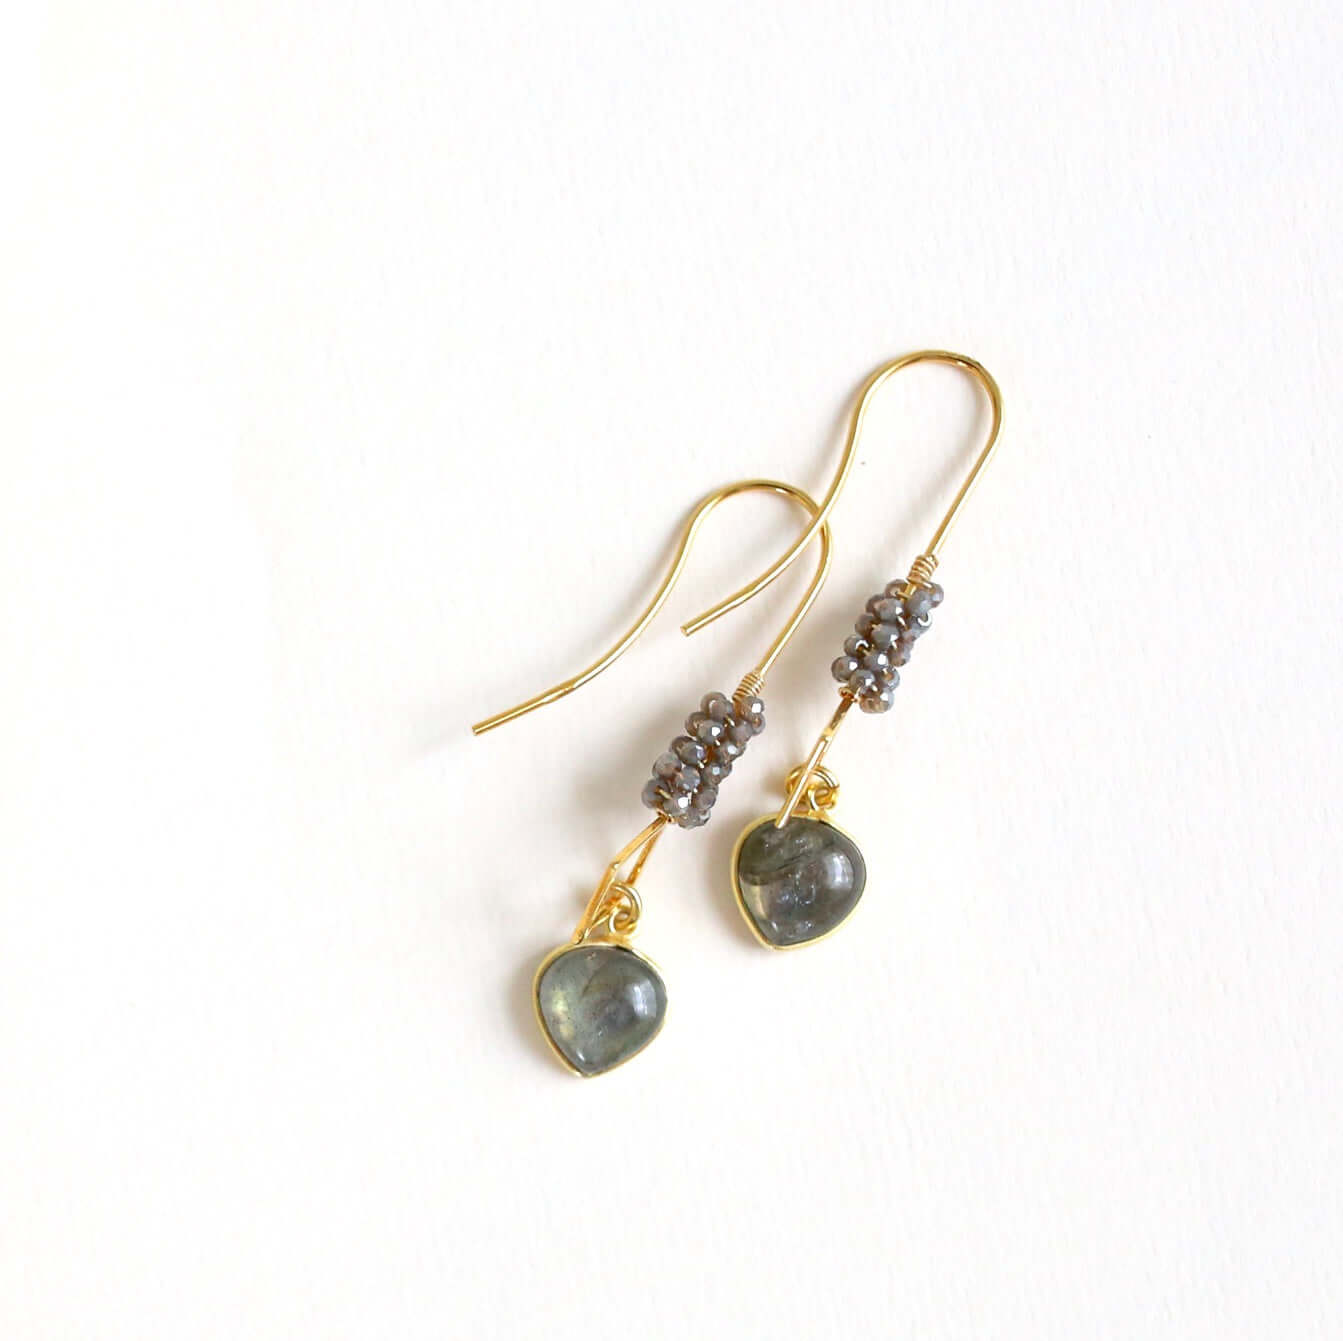 Geometrically inspired labradorite earrings for a modern and chic look